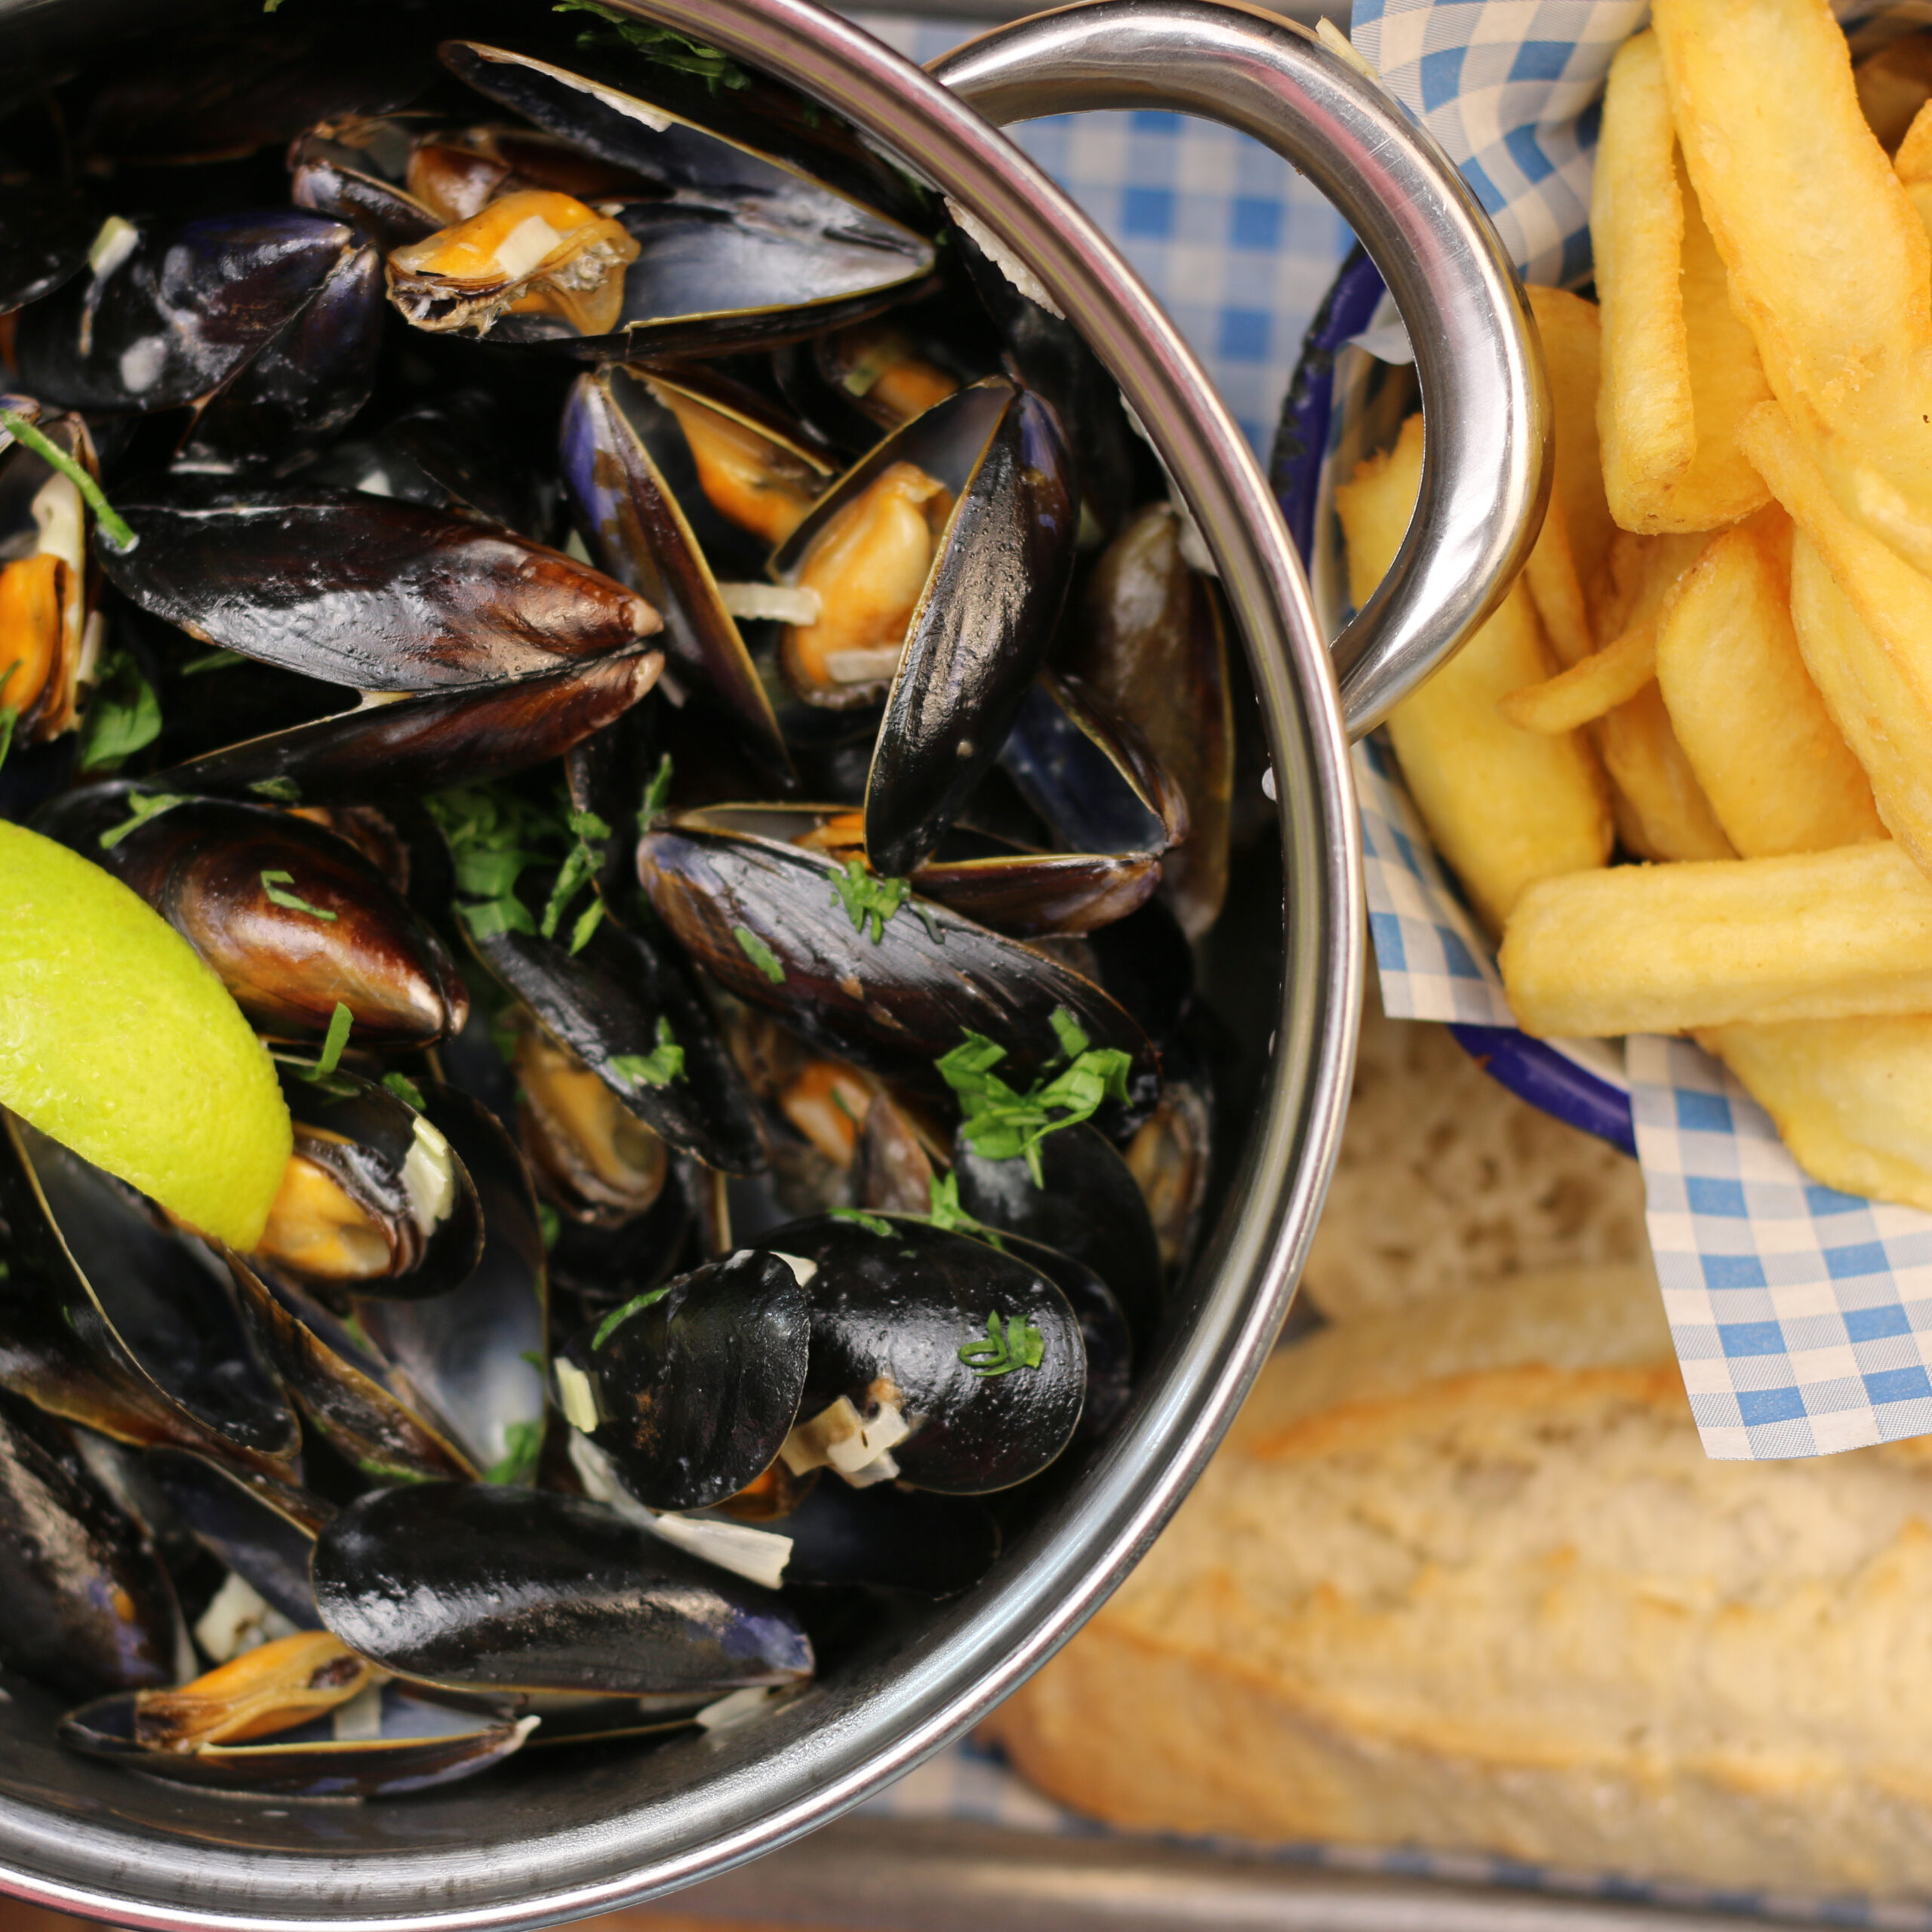 Lunch Mussels served in a bowl with fries and crusty bread